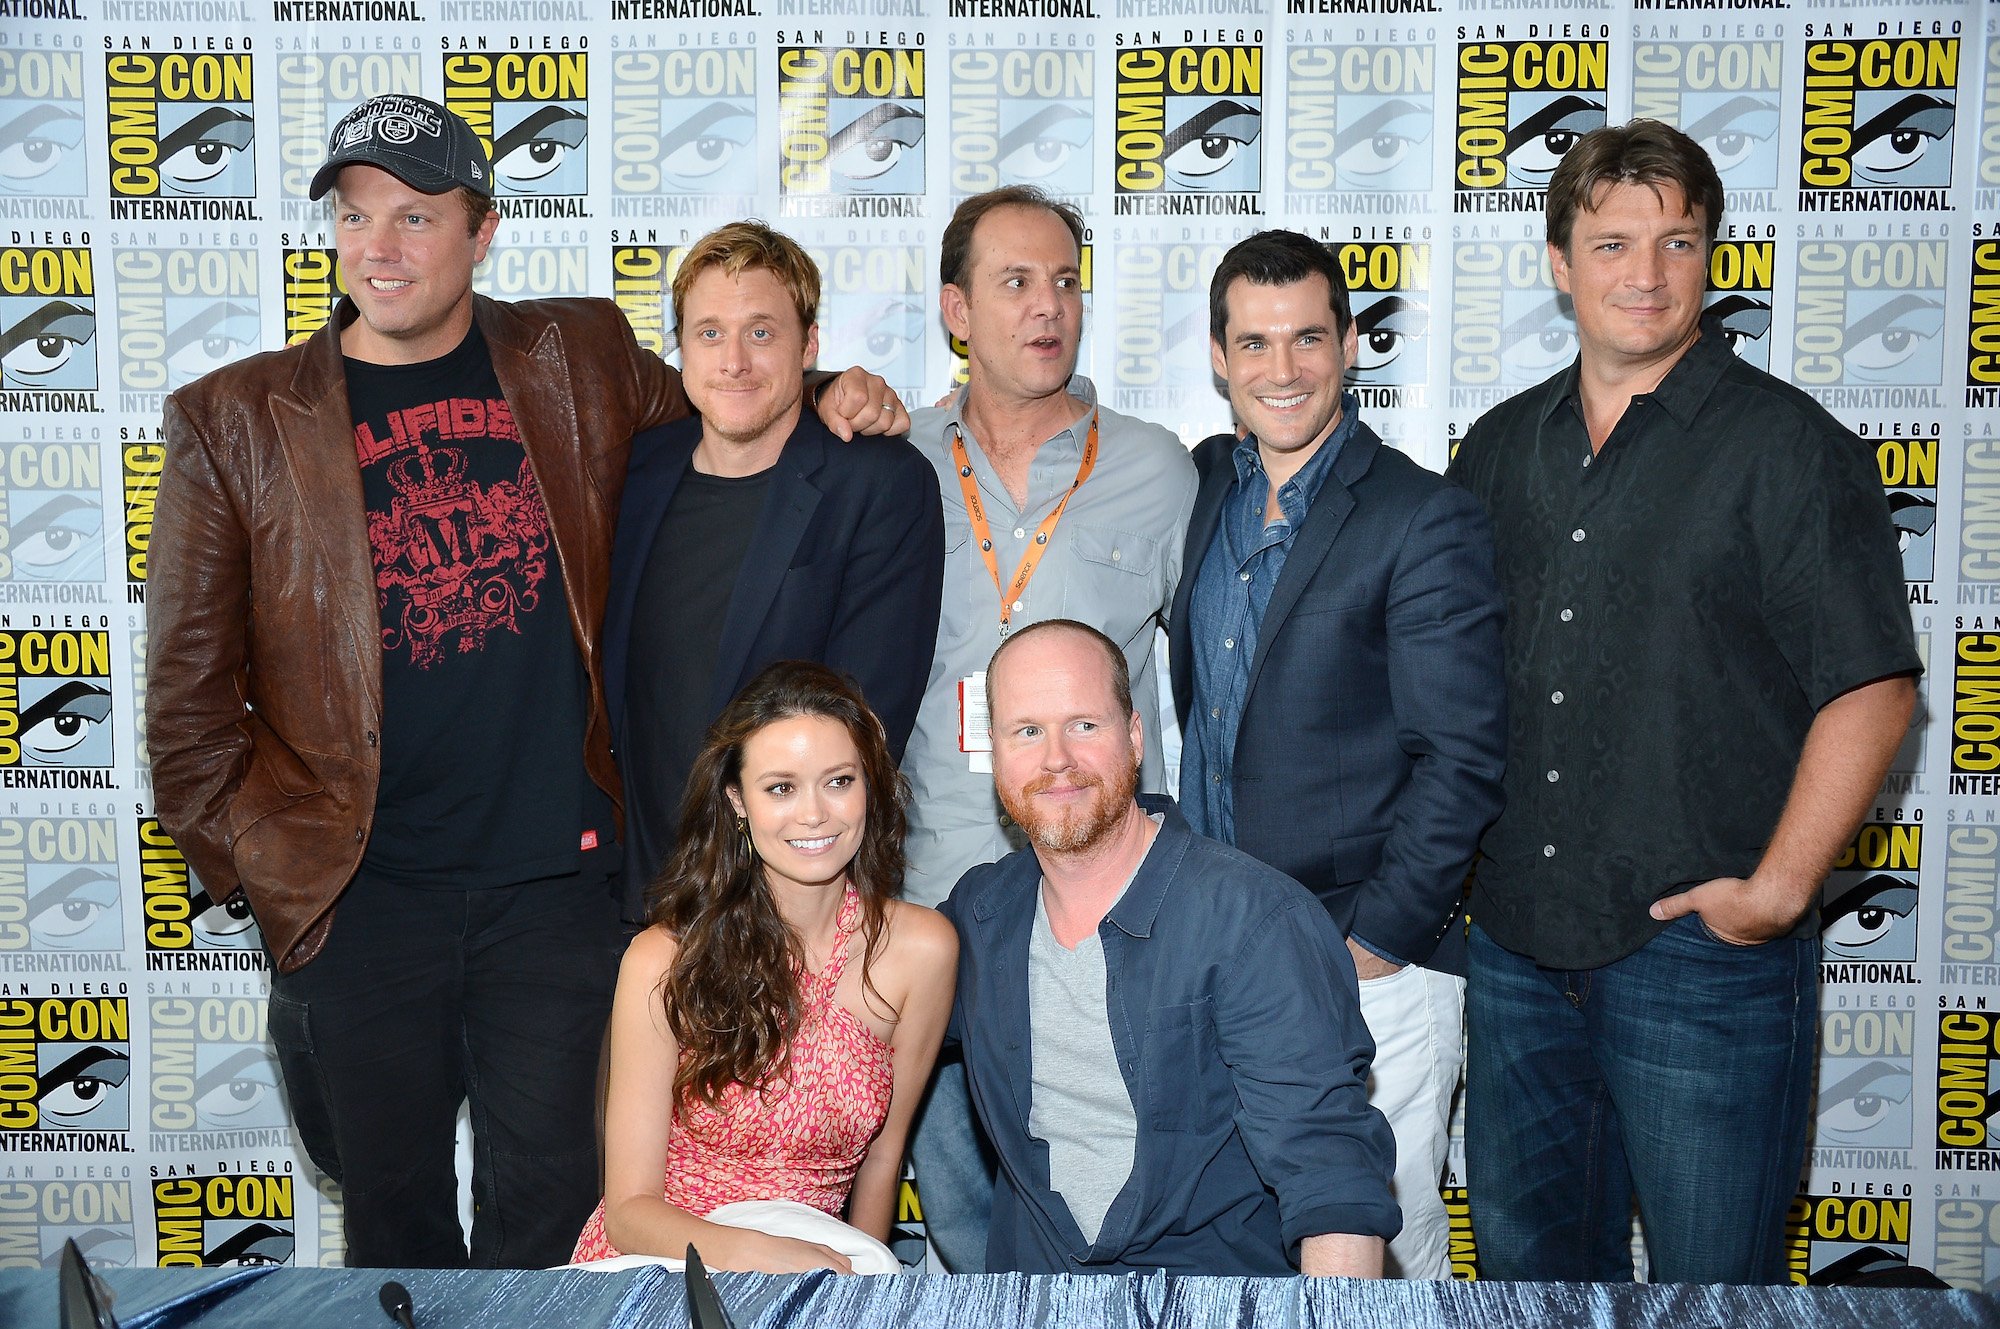 ‘Firefly’: The Show’s 12th Episode Should Have Been Its Last